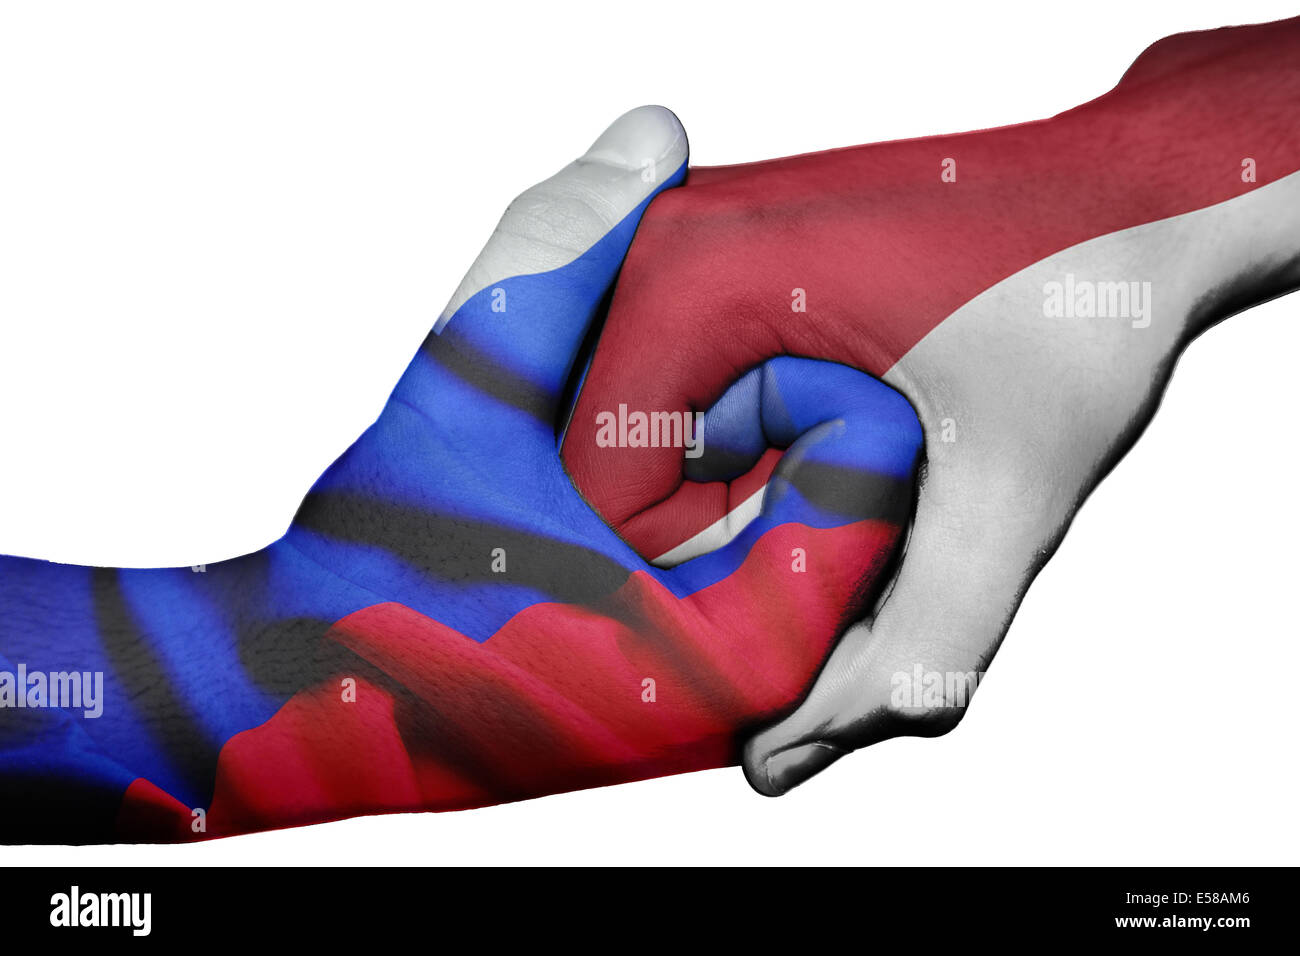 Diplomatic handshake between countries: flags of Russia and Indonesia overprinted the two hands Stock Photo